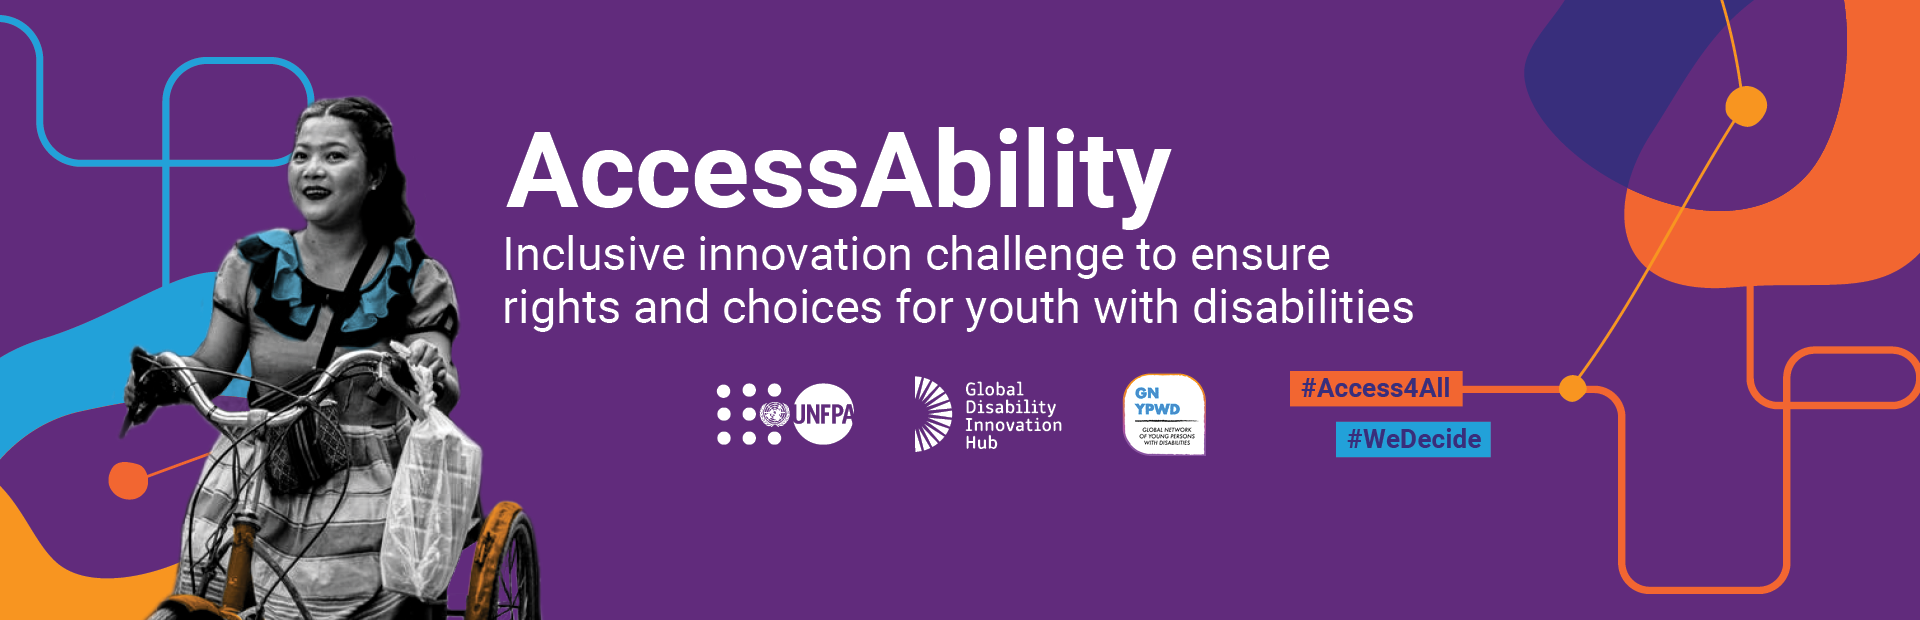 The banner features on the right a young Asian woman with a physical disability. The title text in the centre reads "AccessAbility". The subtitle reads "Inclusive innovation challenge to ensure rights and choices for youth with disabilities". Under the text are logos of the United Nations Population Fund, Global Disability Innovation Hub, and Global Network for Young Persons with Disabilities.